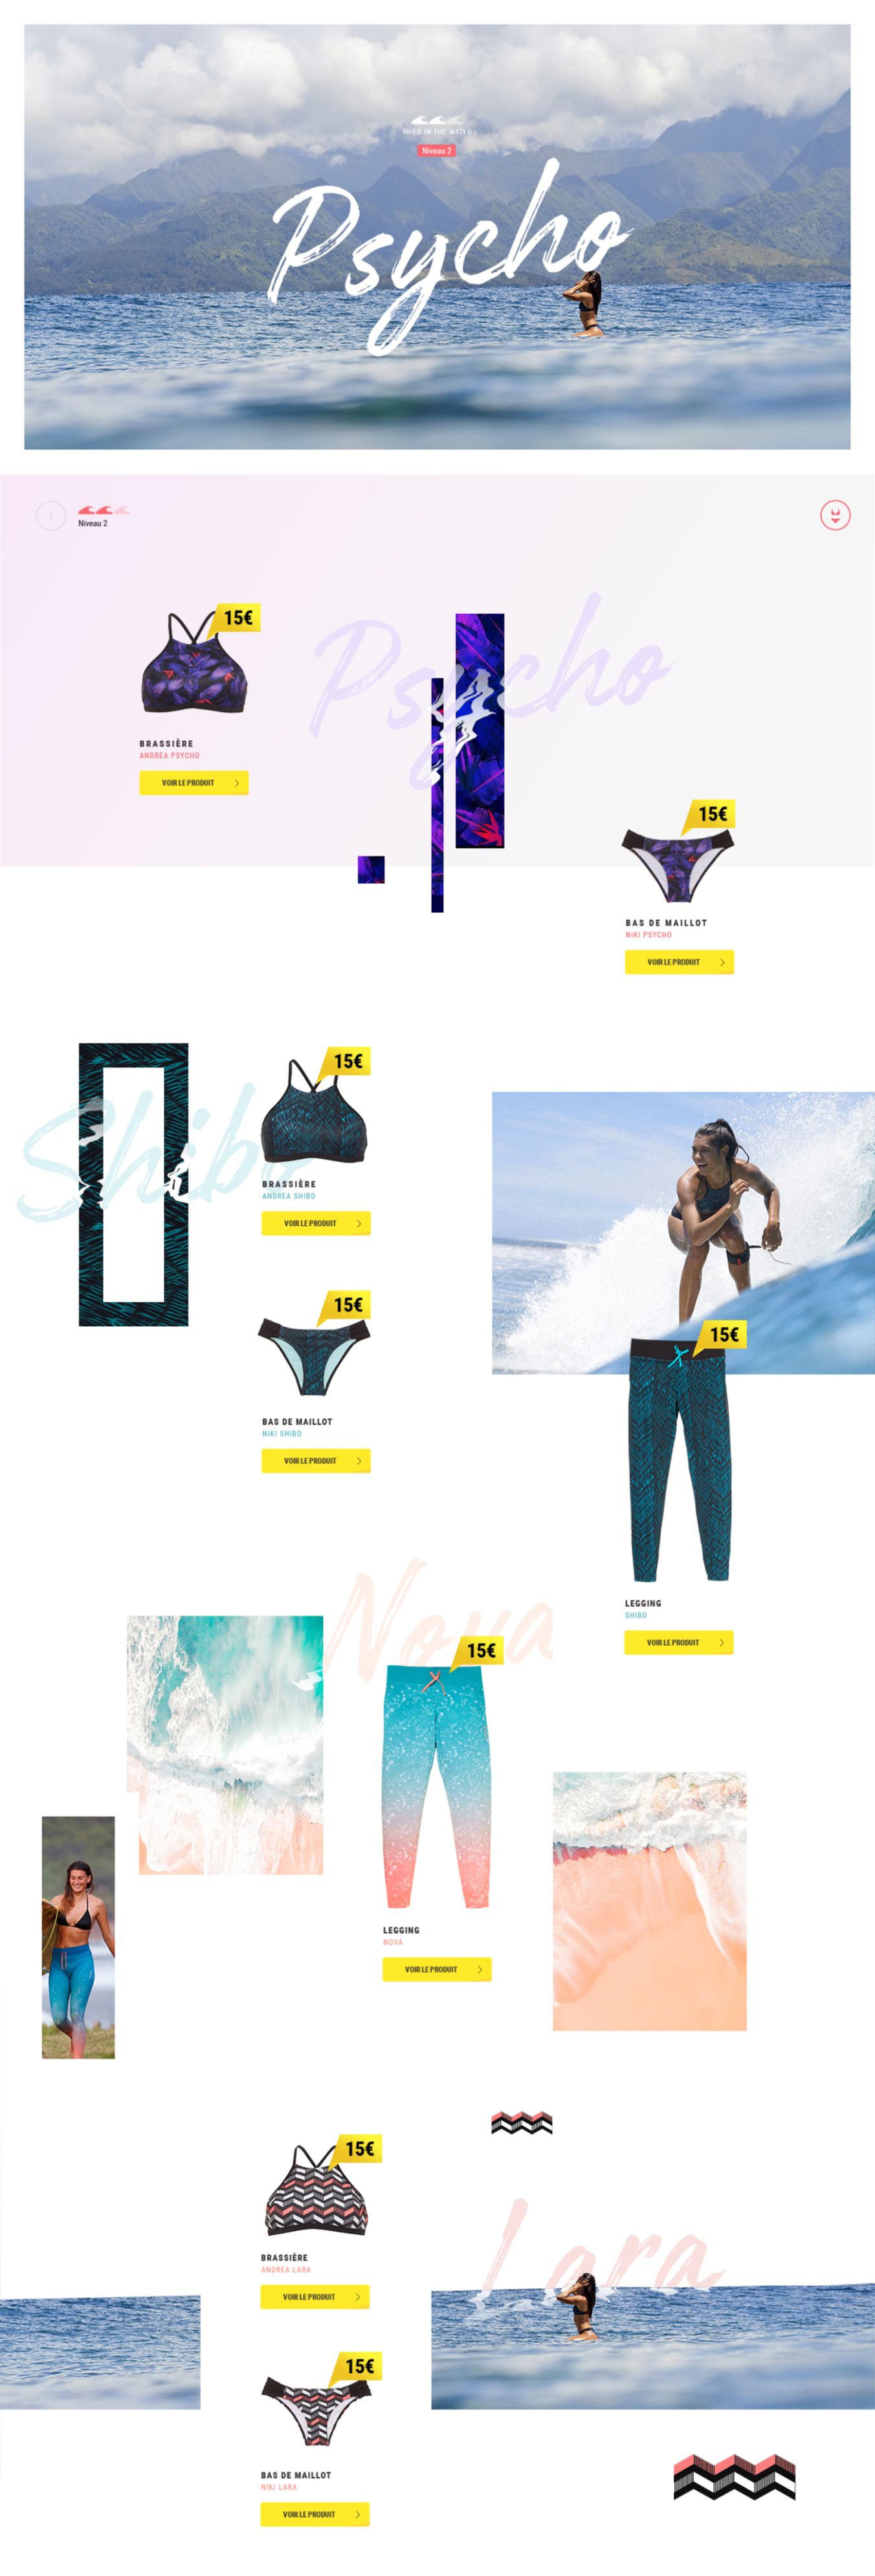 OLAIAN Lookbook 2018 summer edition landing page pyscho